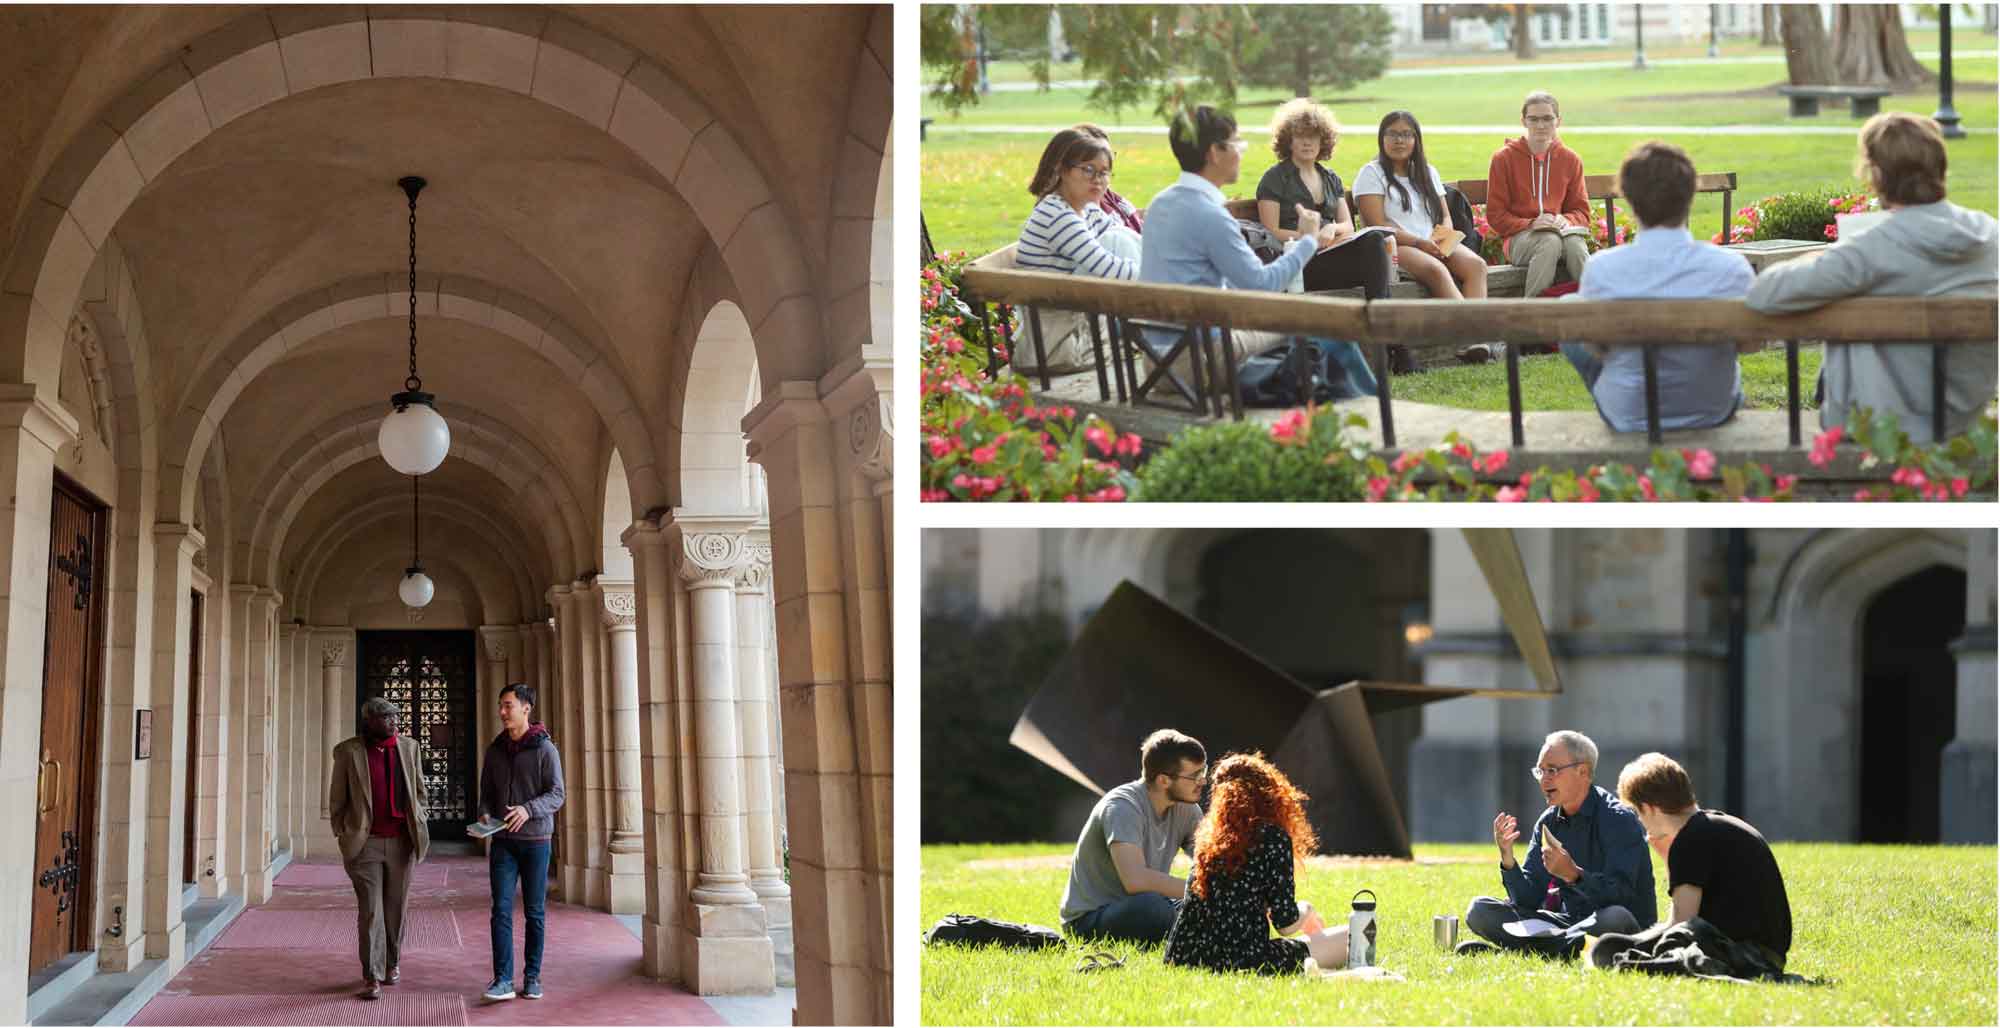 Photo collage of 3 photos showing students and faculty in meaningful conversations